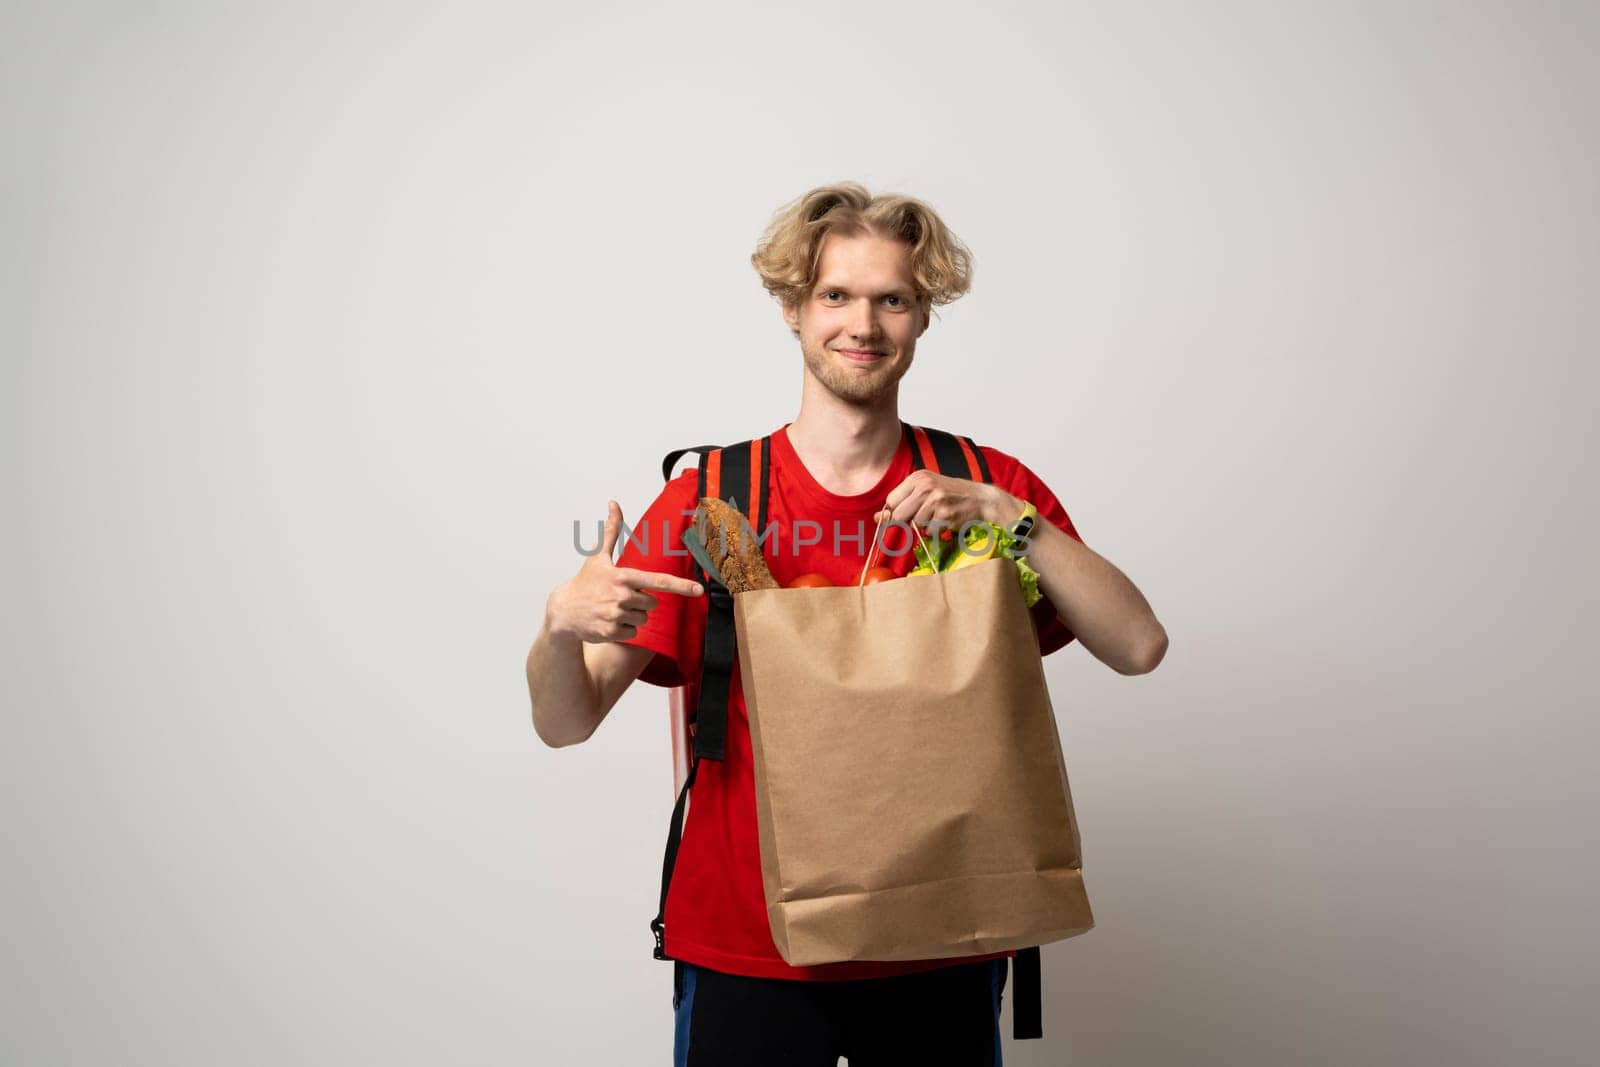 Food delivery service. Portrait of pleased delivery man in red uniform smiling while carrying paper bag with food products isolated over white background